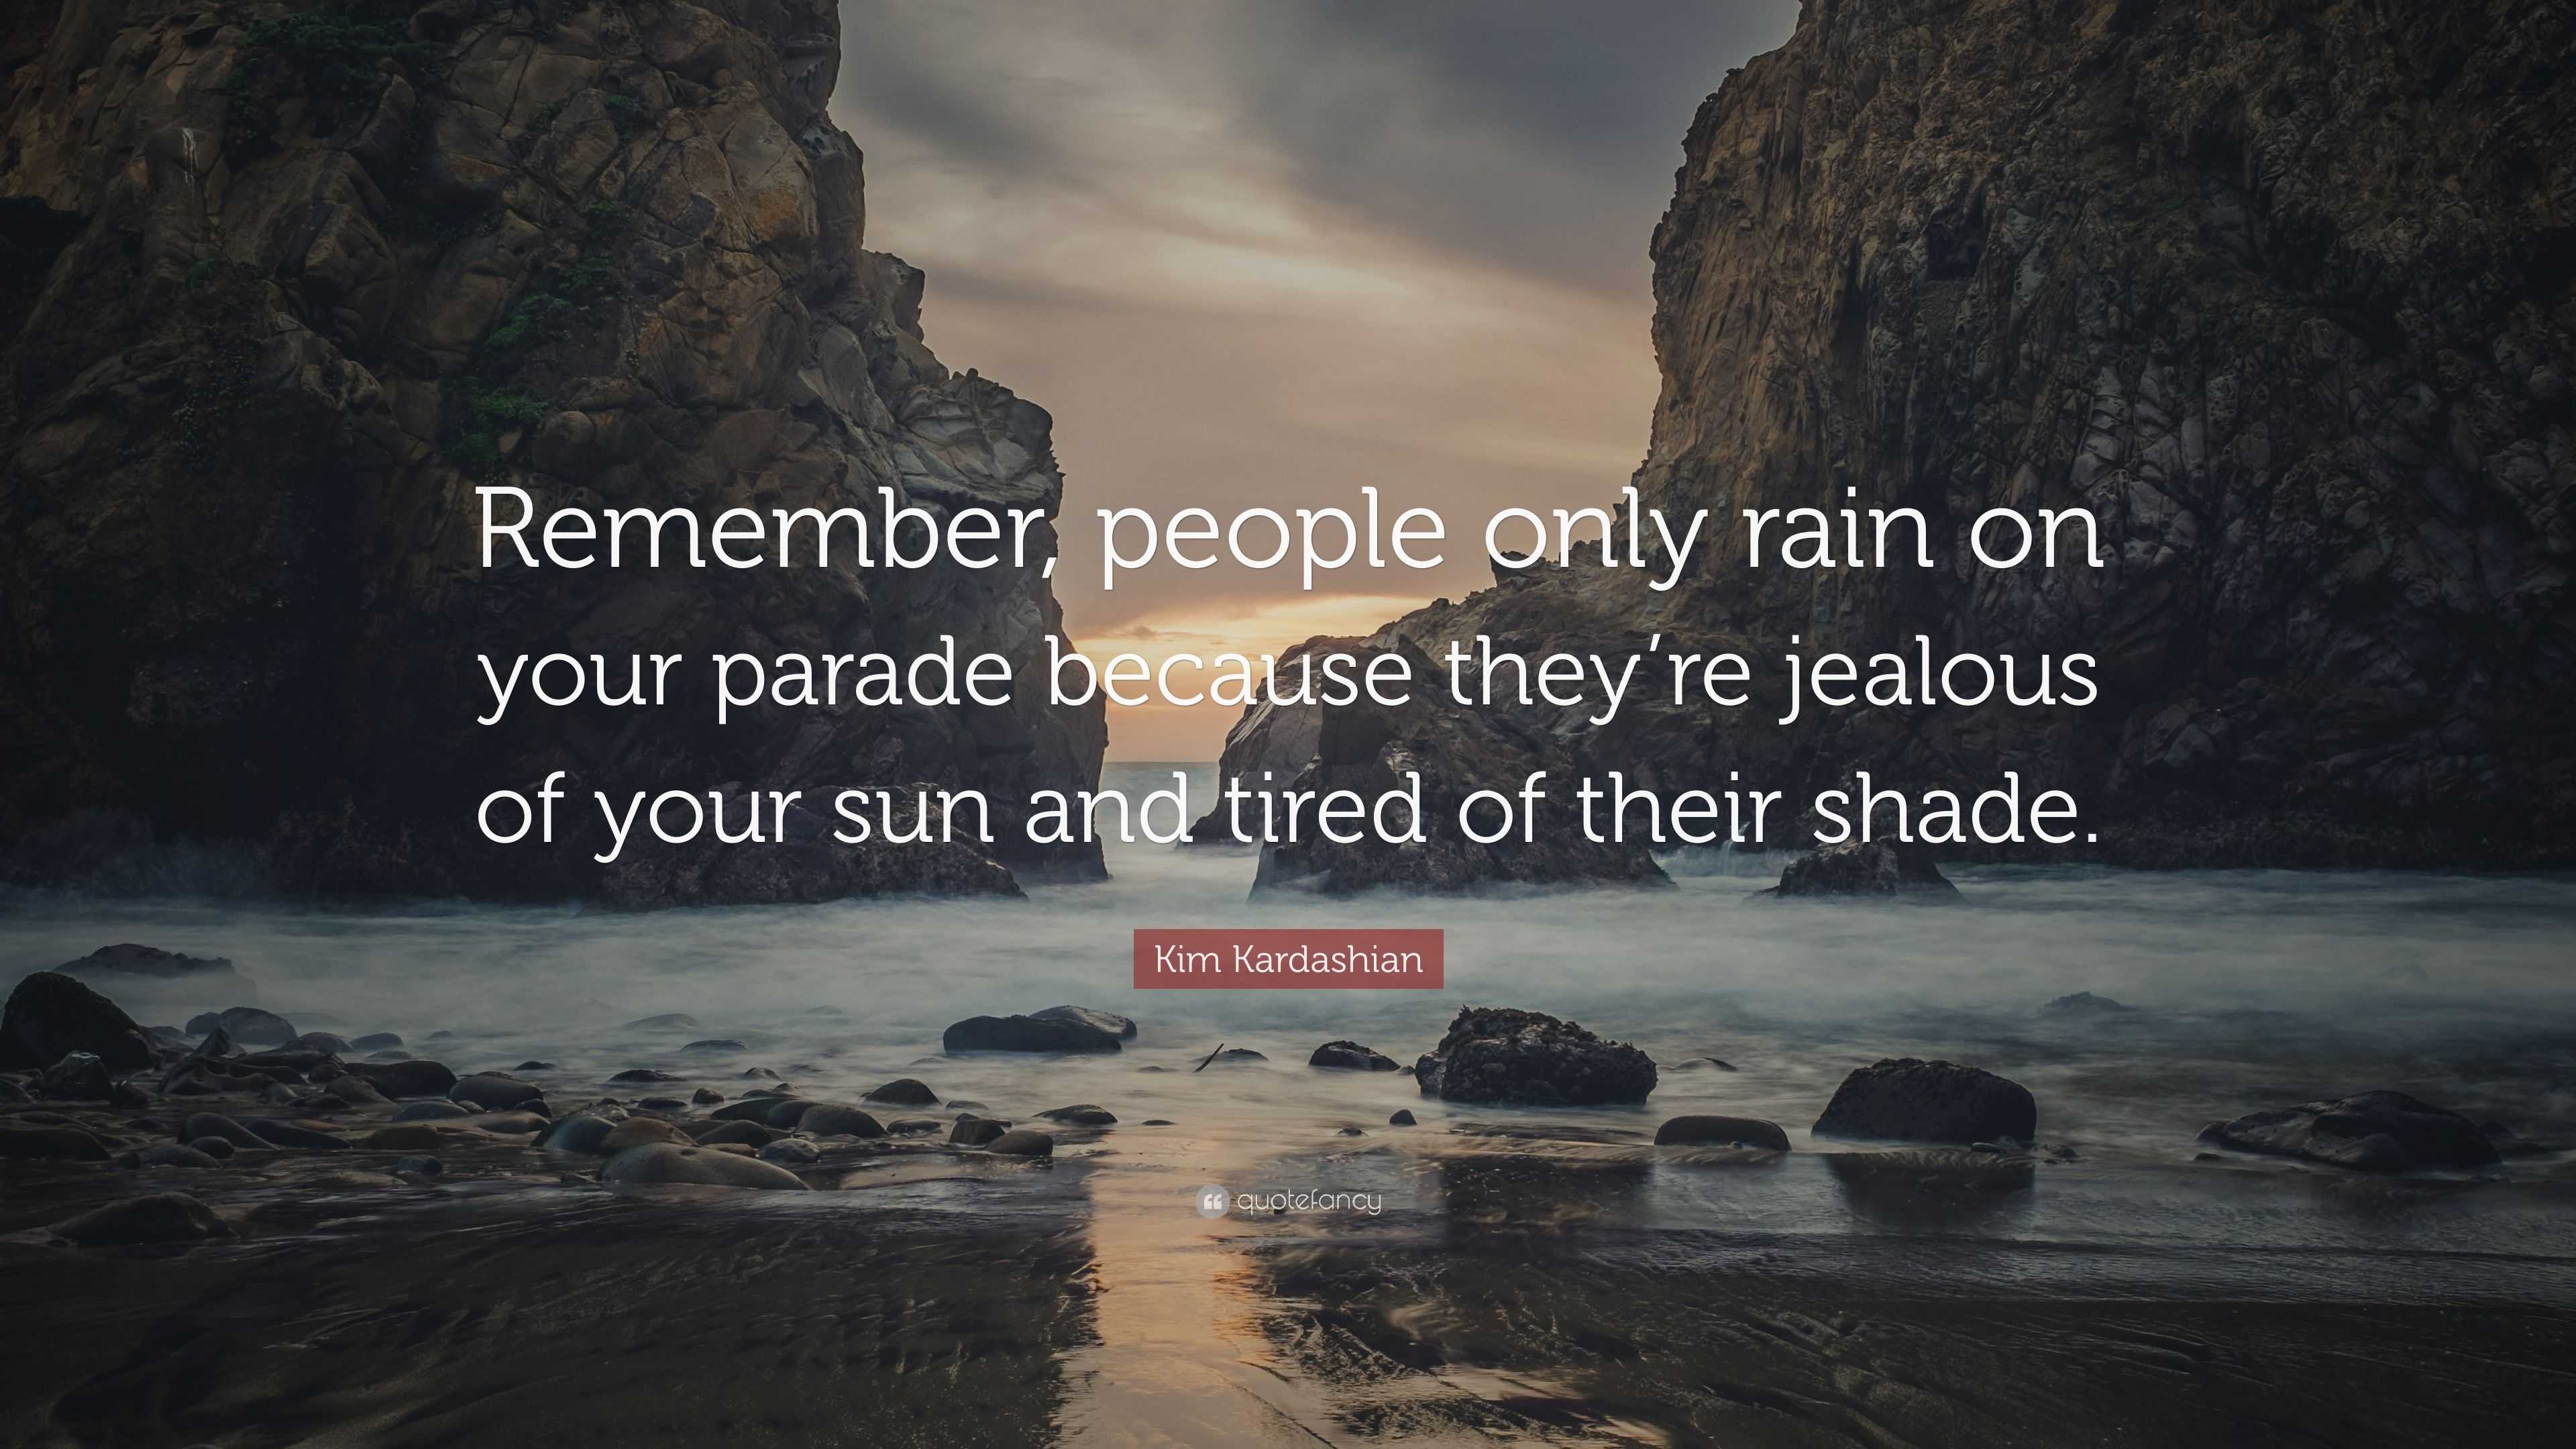 another phrase for rain on your parade